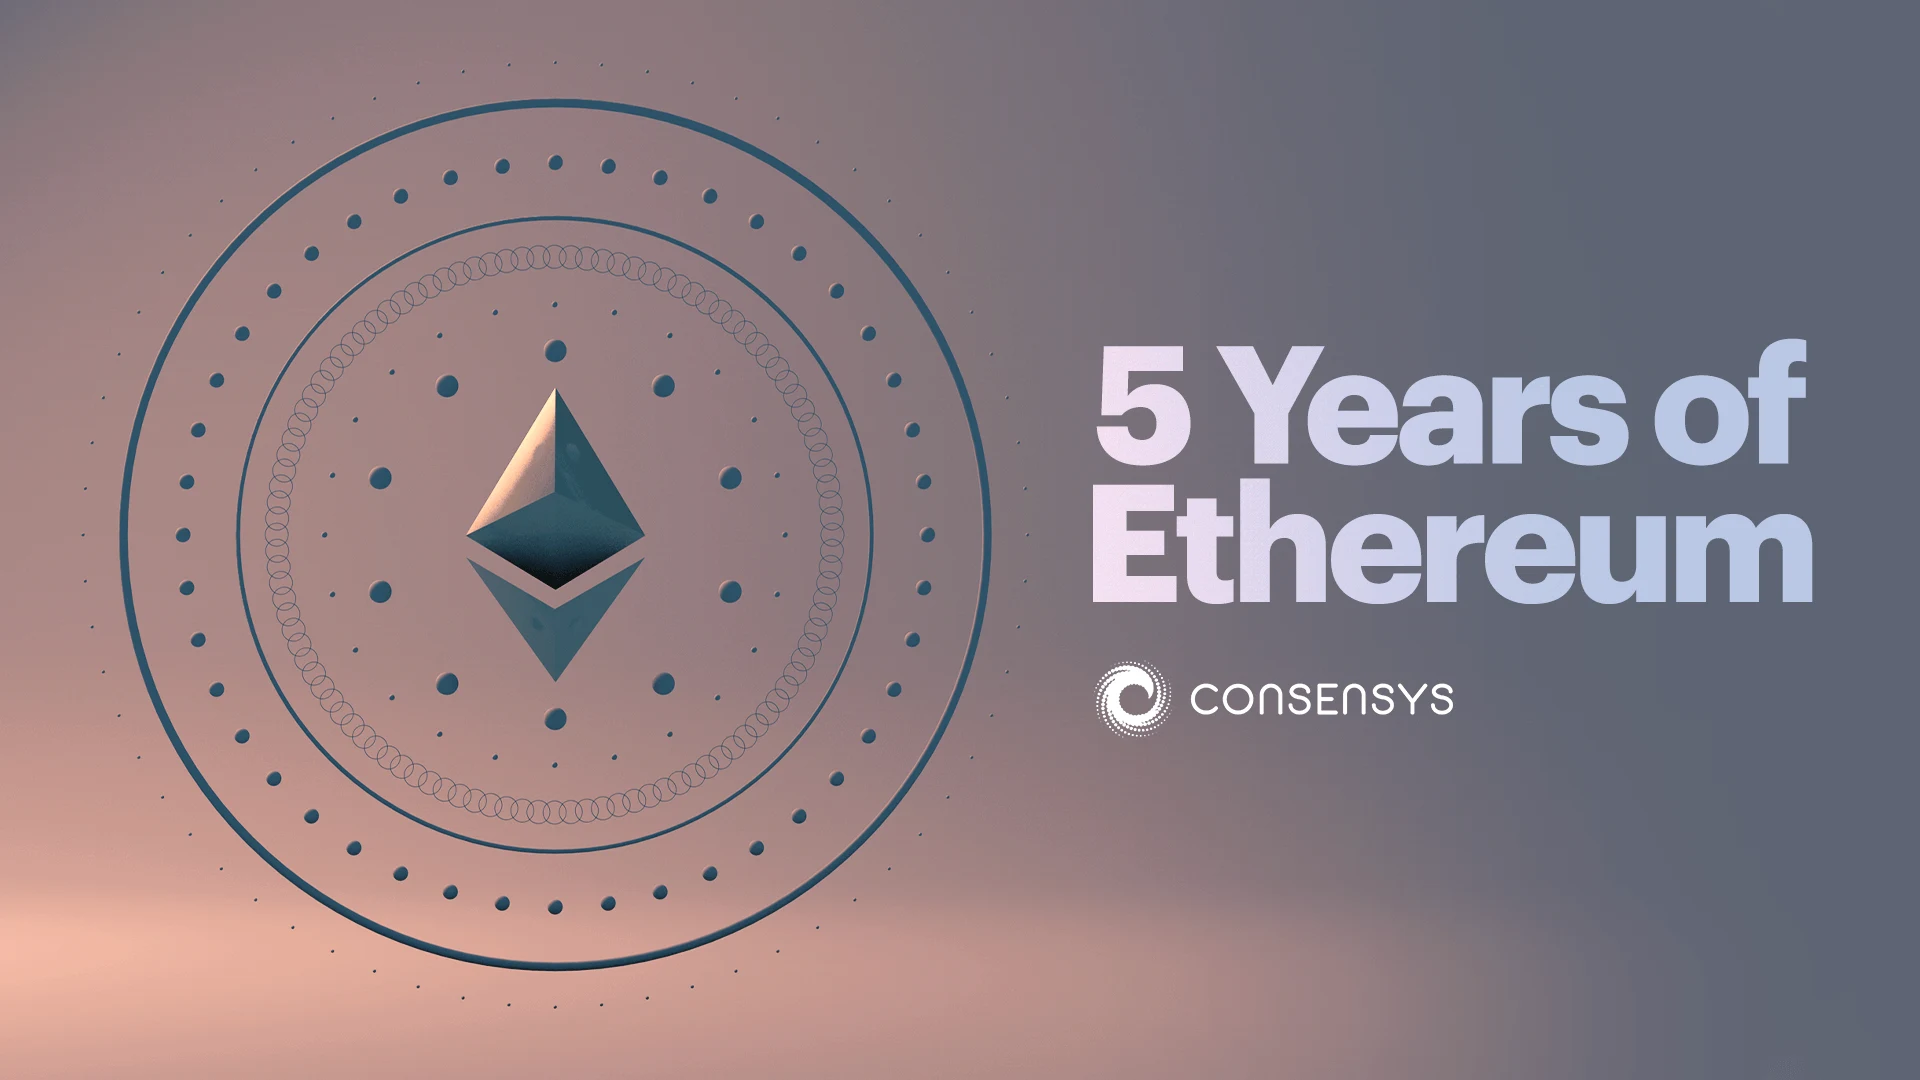 Image: The State of the Ethereum Network: 5 Years Running